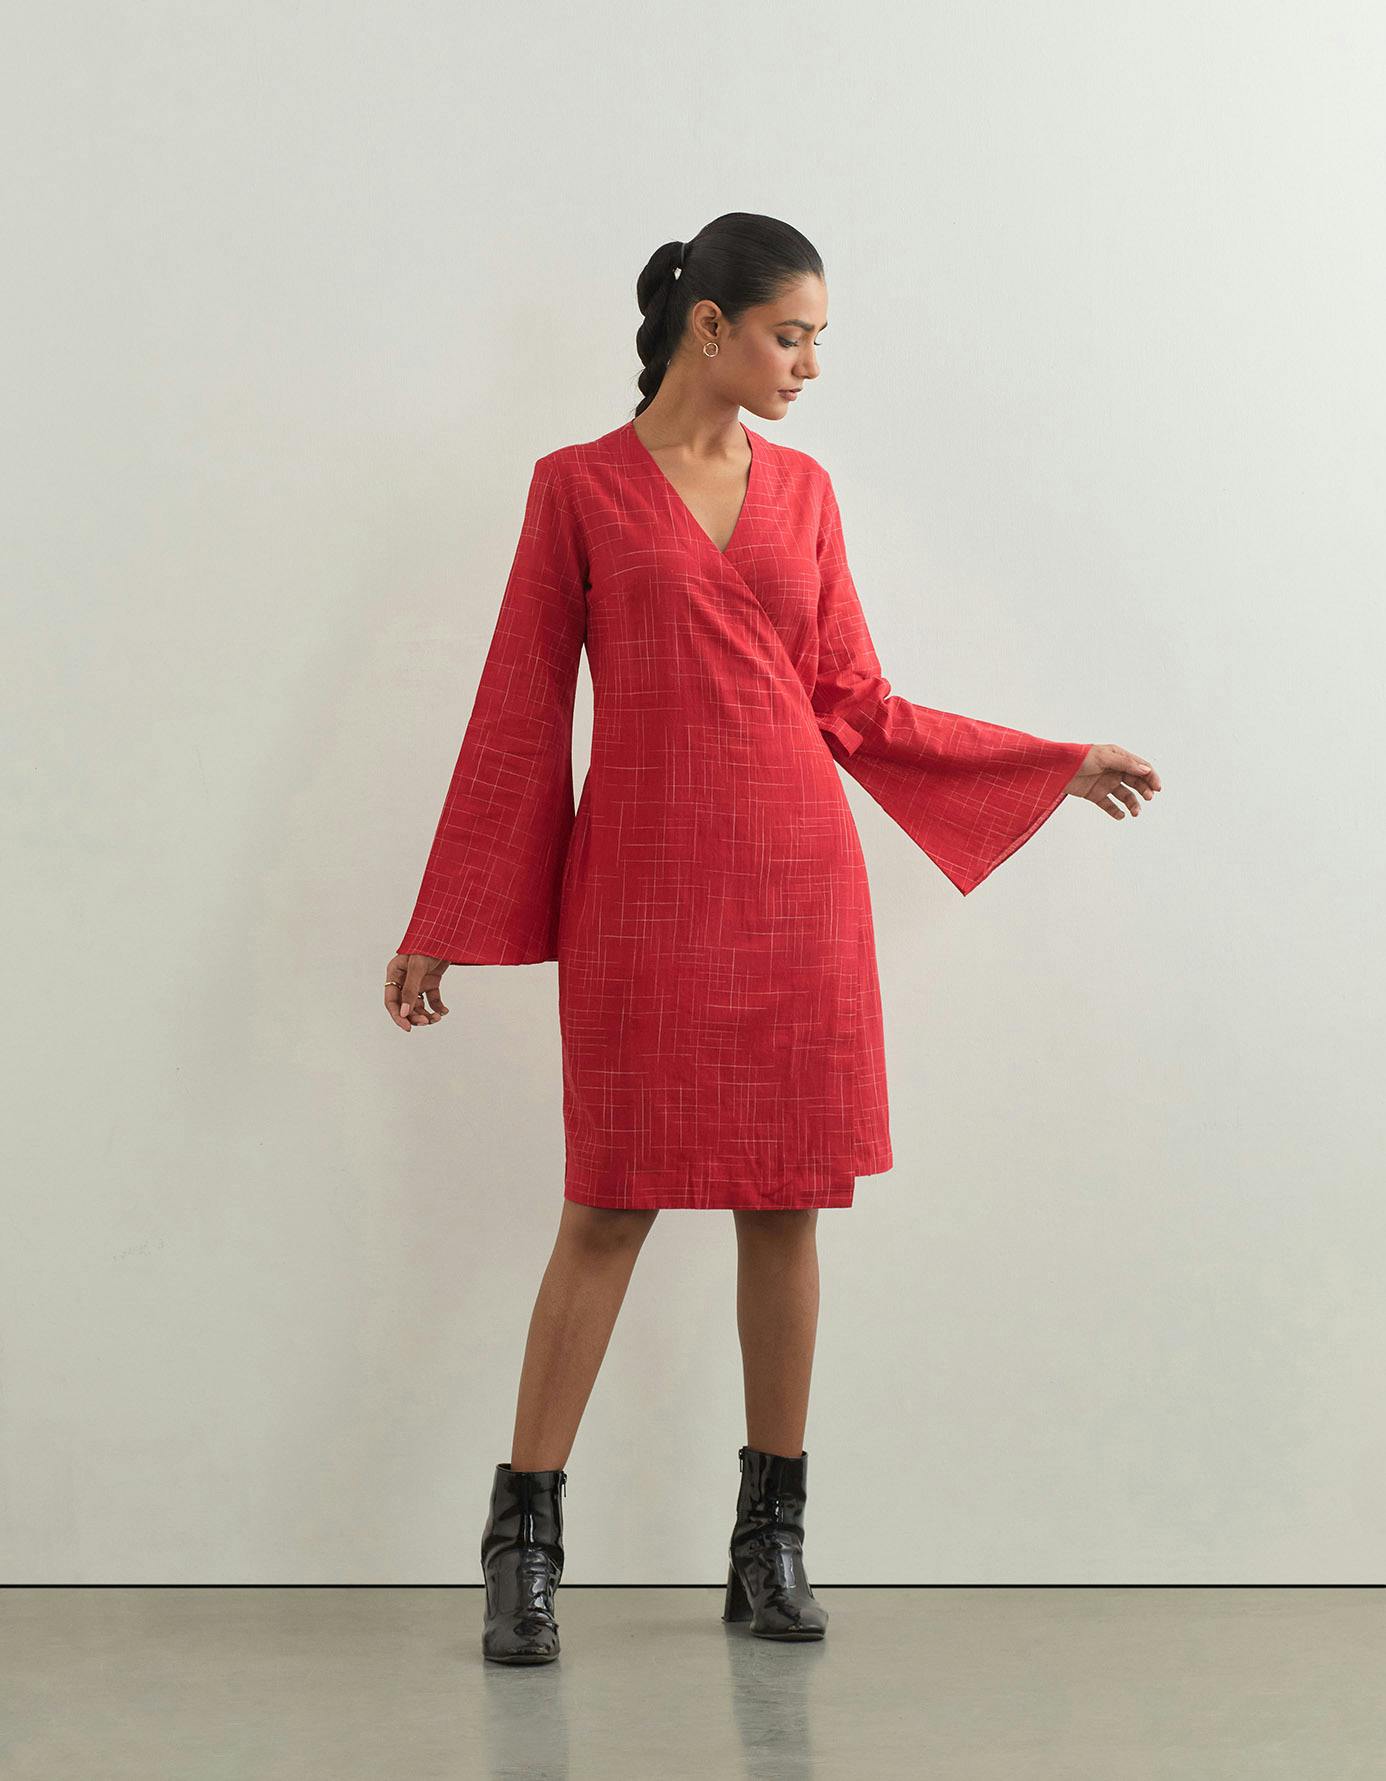 AZUKI DRESS In Red, a product by SIX BUTTONS DOWN